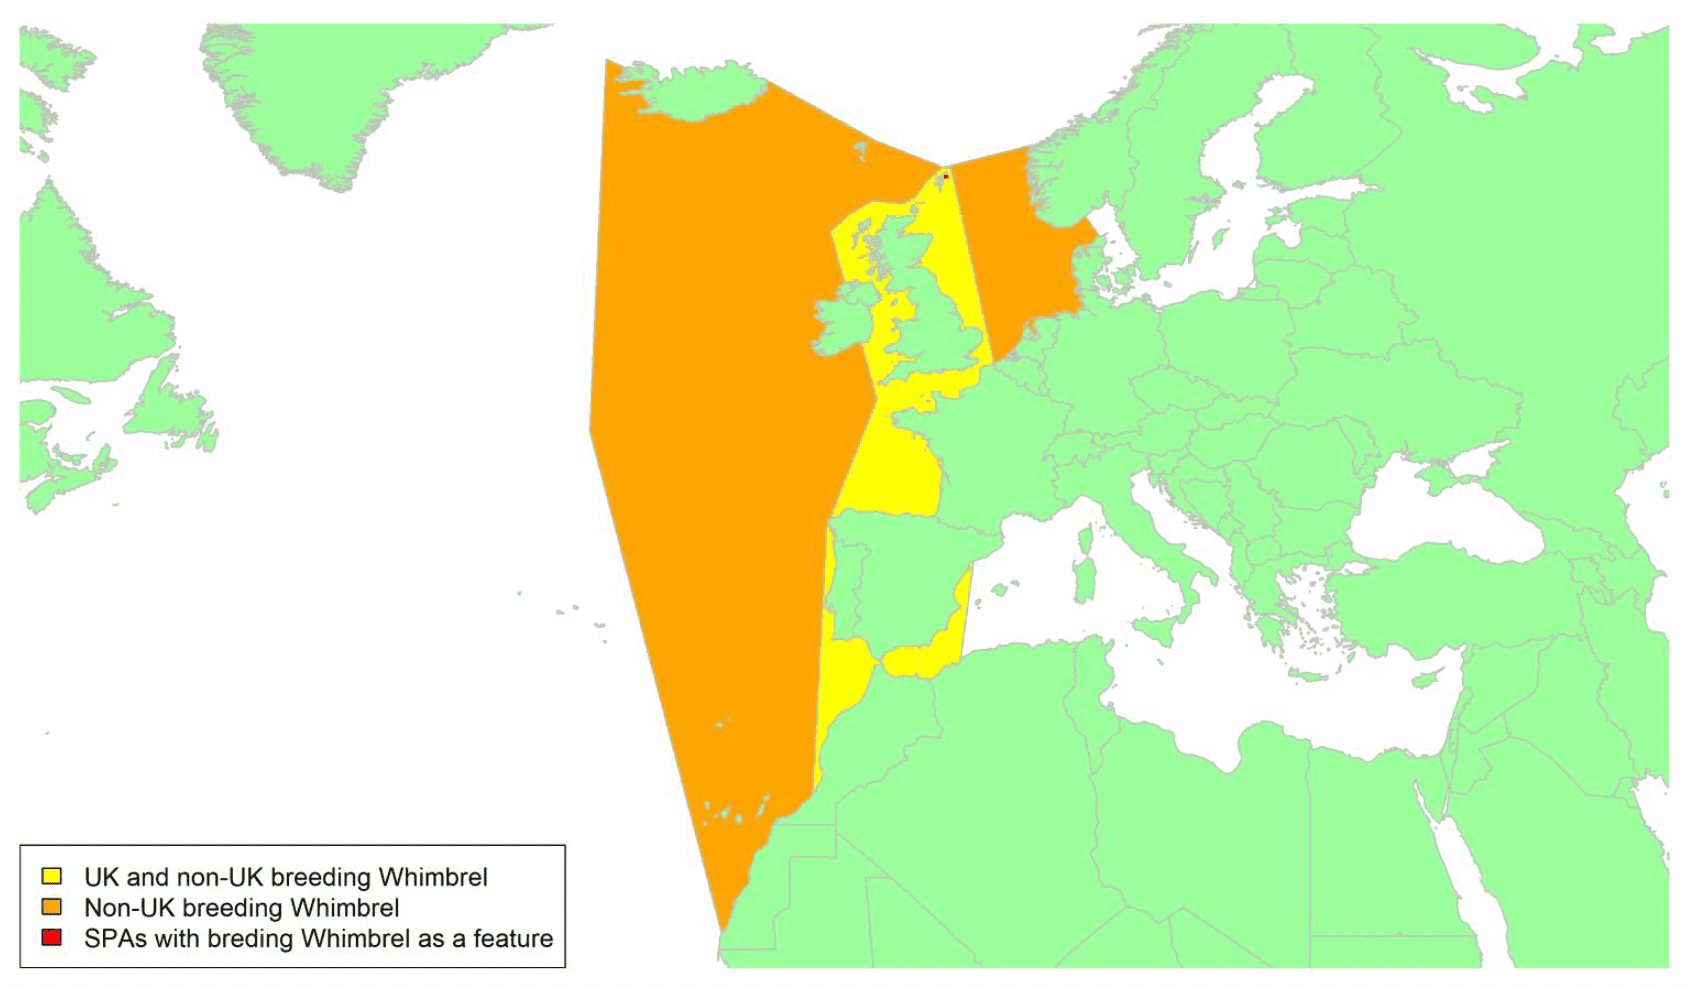 Map of Europe and Northern Africa showing migratory routes and SPAs within the UK for Whimbrel as described in the text below.